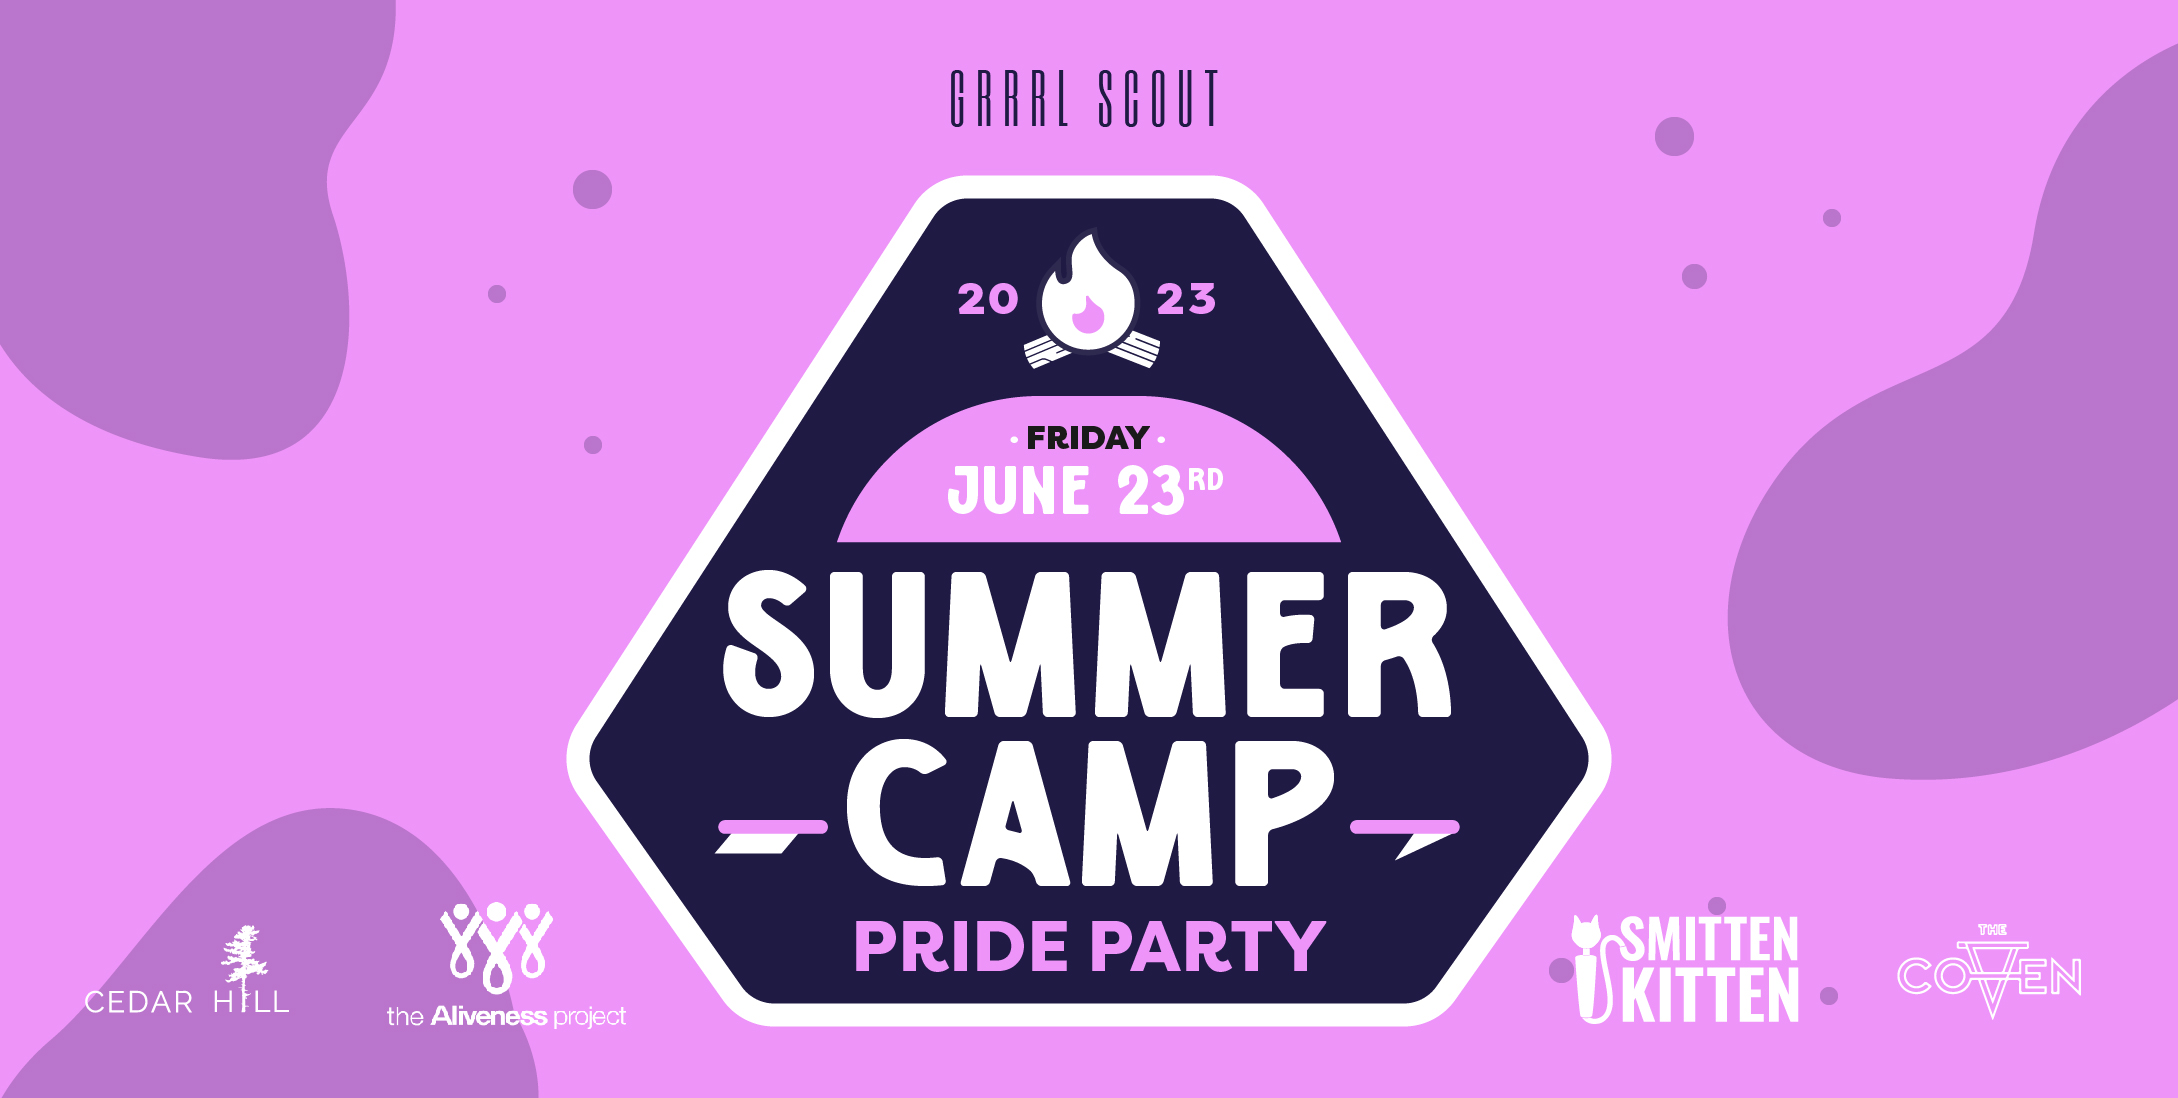 GRRRL SCOUT presents 10th Annual SUMMER CAMP Pride Party Friday, June 23 Under The Canopy / The Hook and Ladder Theater 7:00pm - 1:00am :: 21+ $20 + (Fees) Early Bird (limited QTY) $26 + (Fees) Advance $36 + (Fees) Day Of $40 (Flat) Door (**Limited and Based on Capacity**) Note: All ticket sales are final. No Refunds.